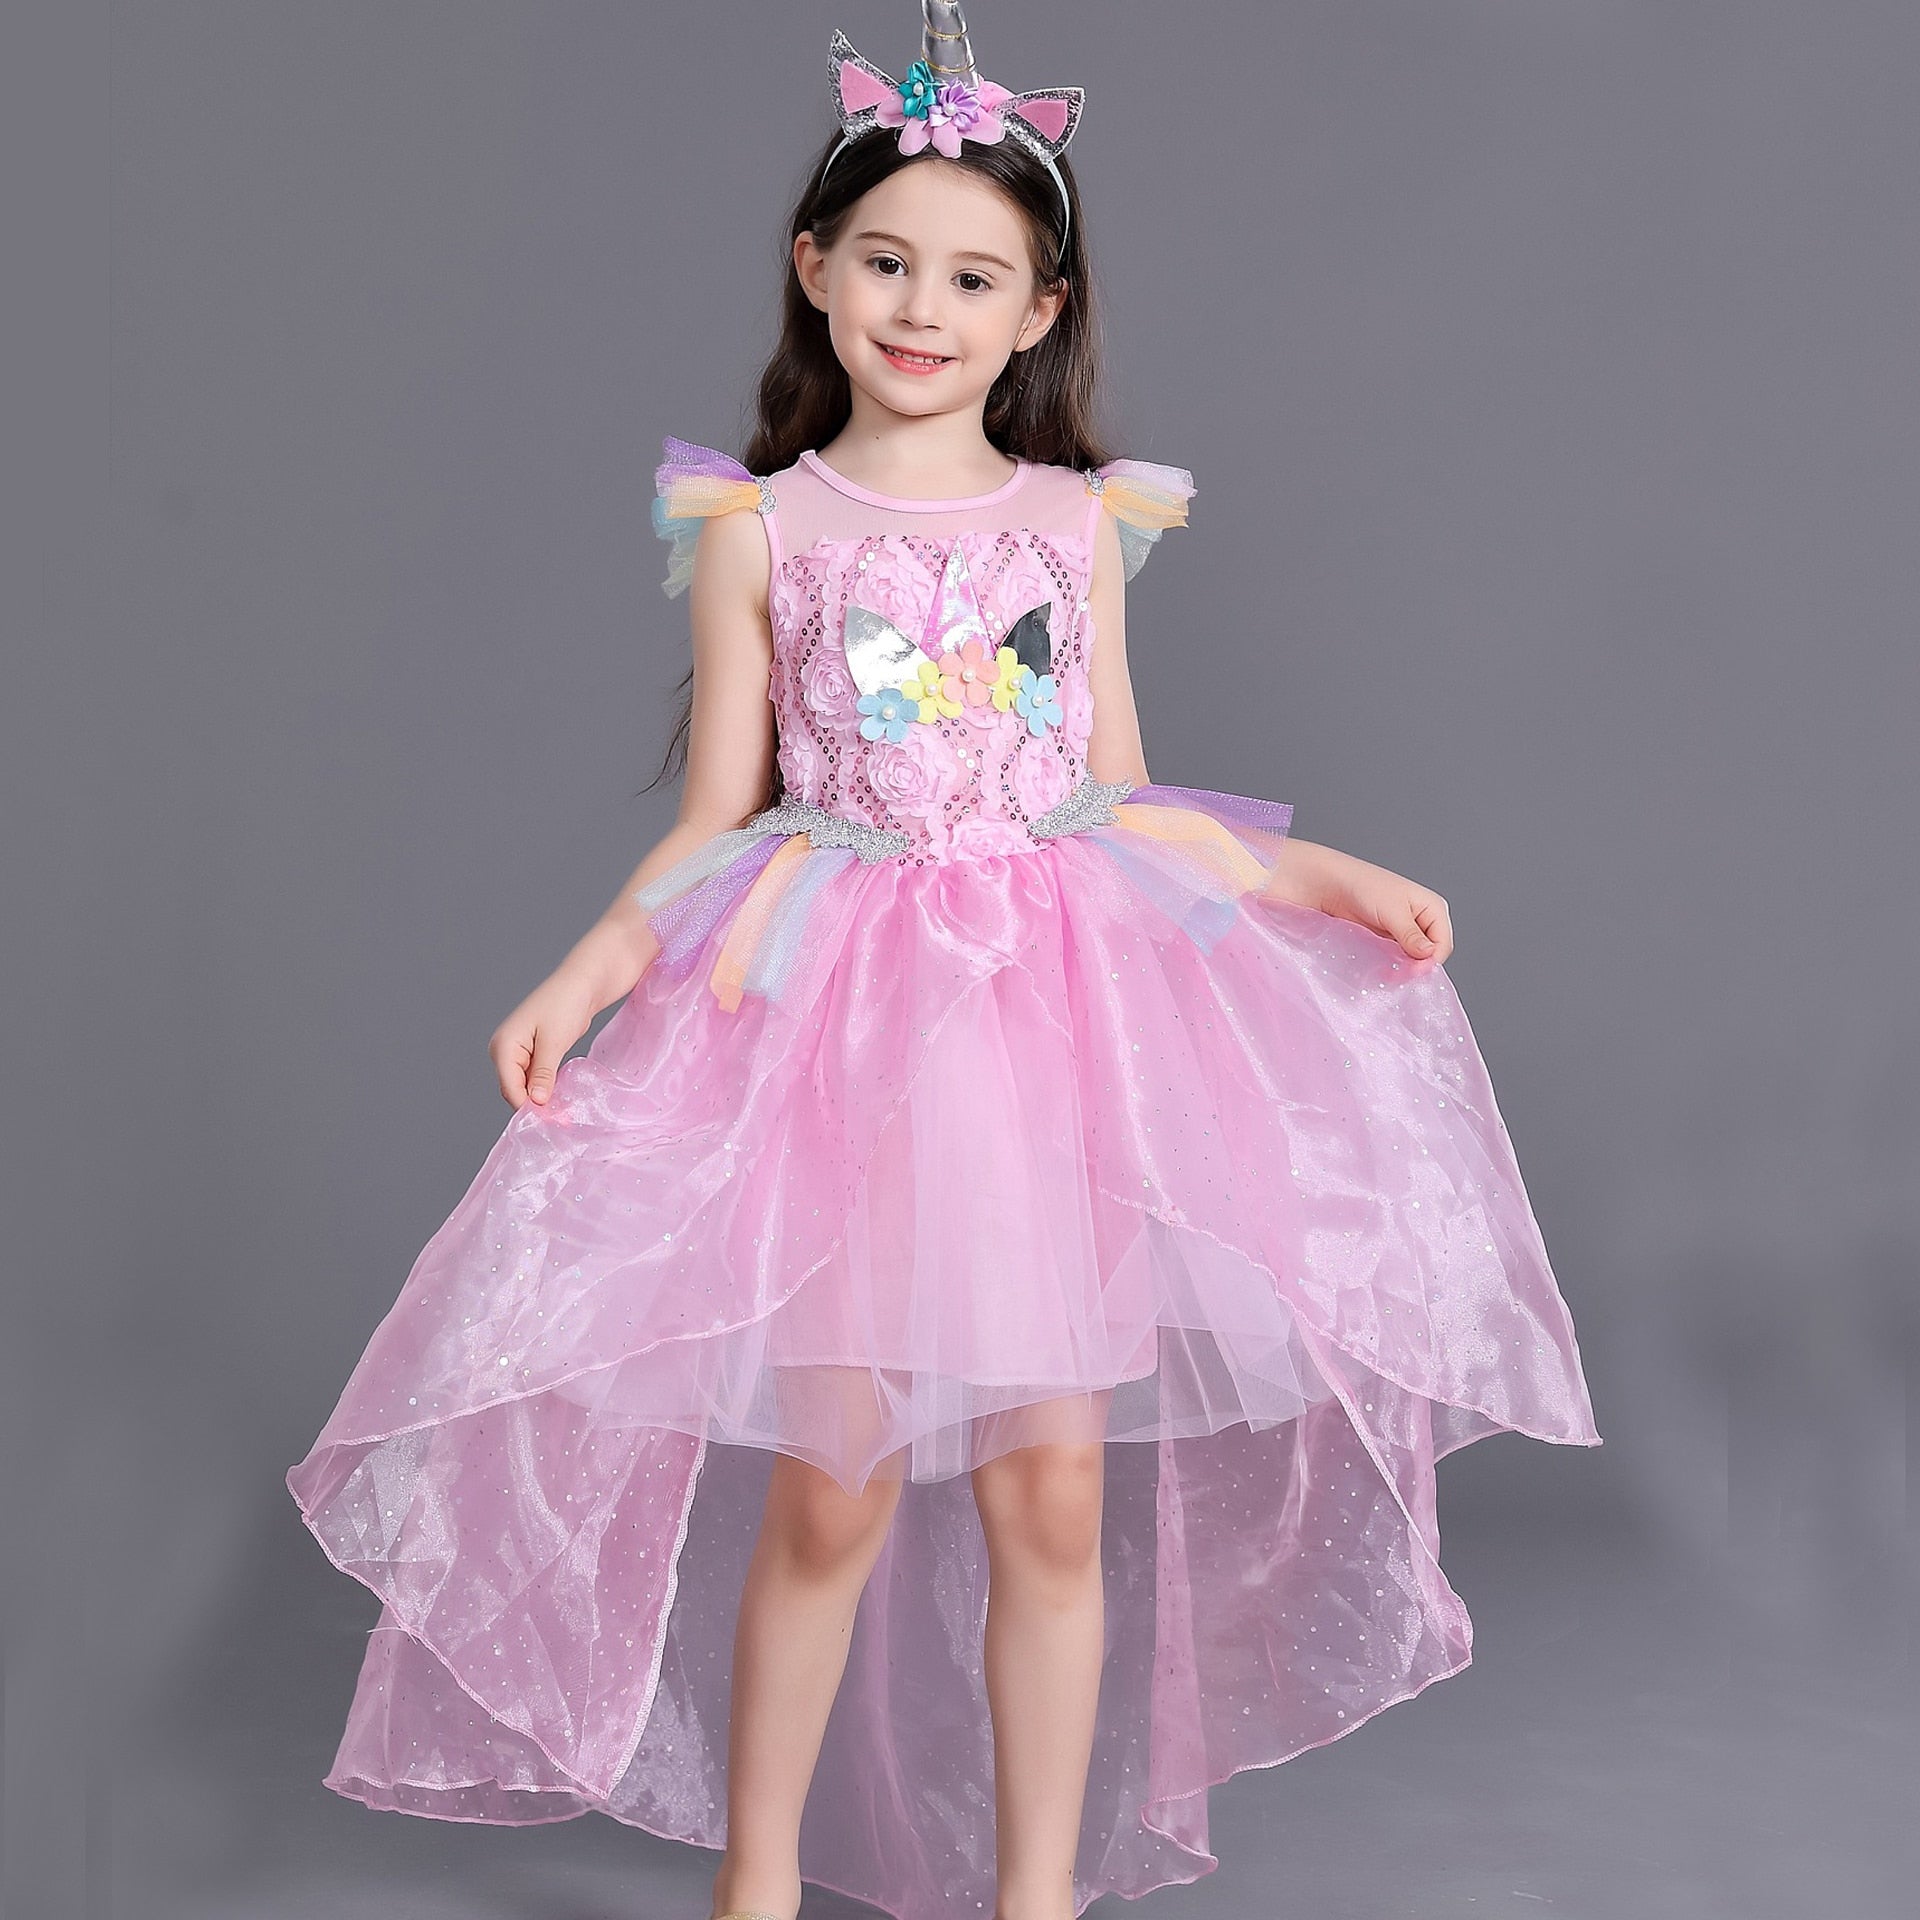 Maurya Girls Wear Beautiful Gown for Girls (4-5 Years, Coral) : Amazon.in:  Clothing & Accessories